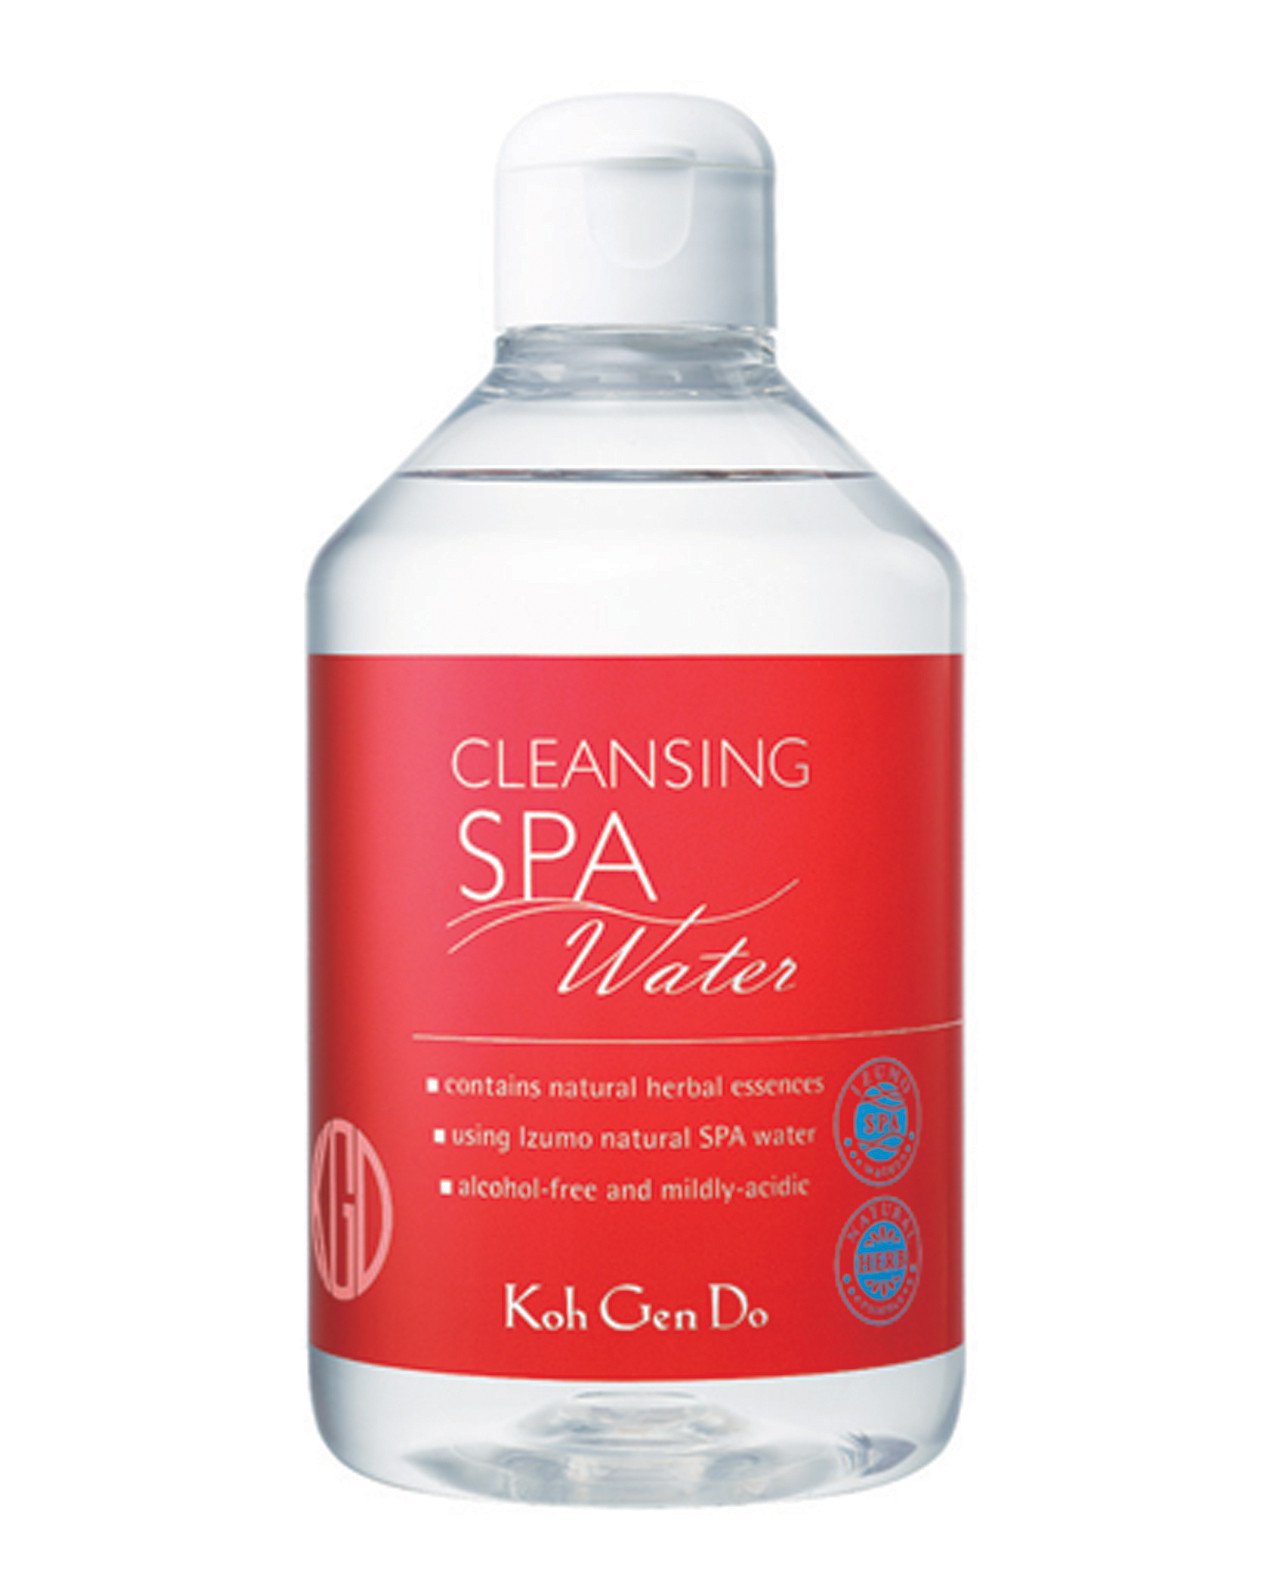 Cleansing Spa Water Image